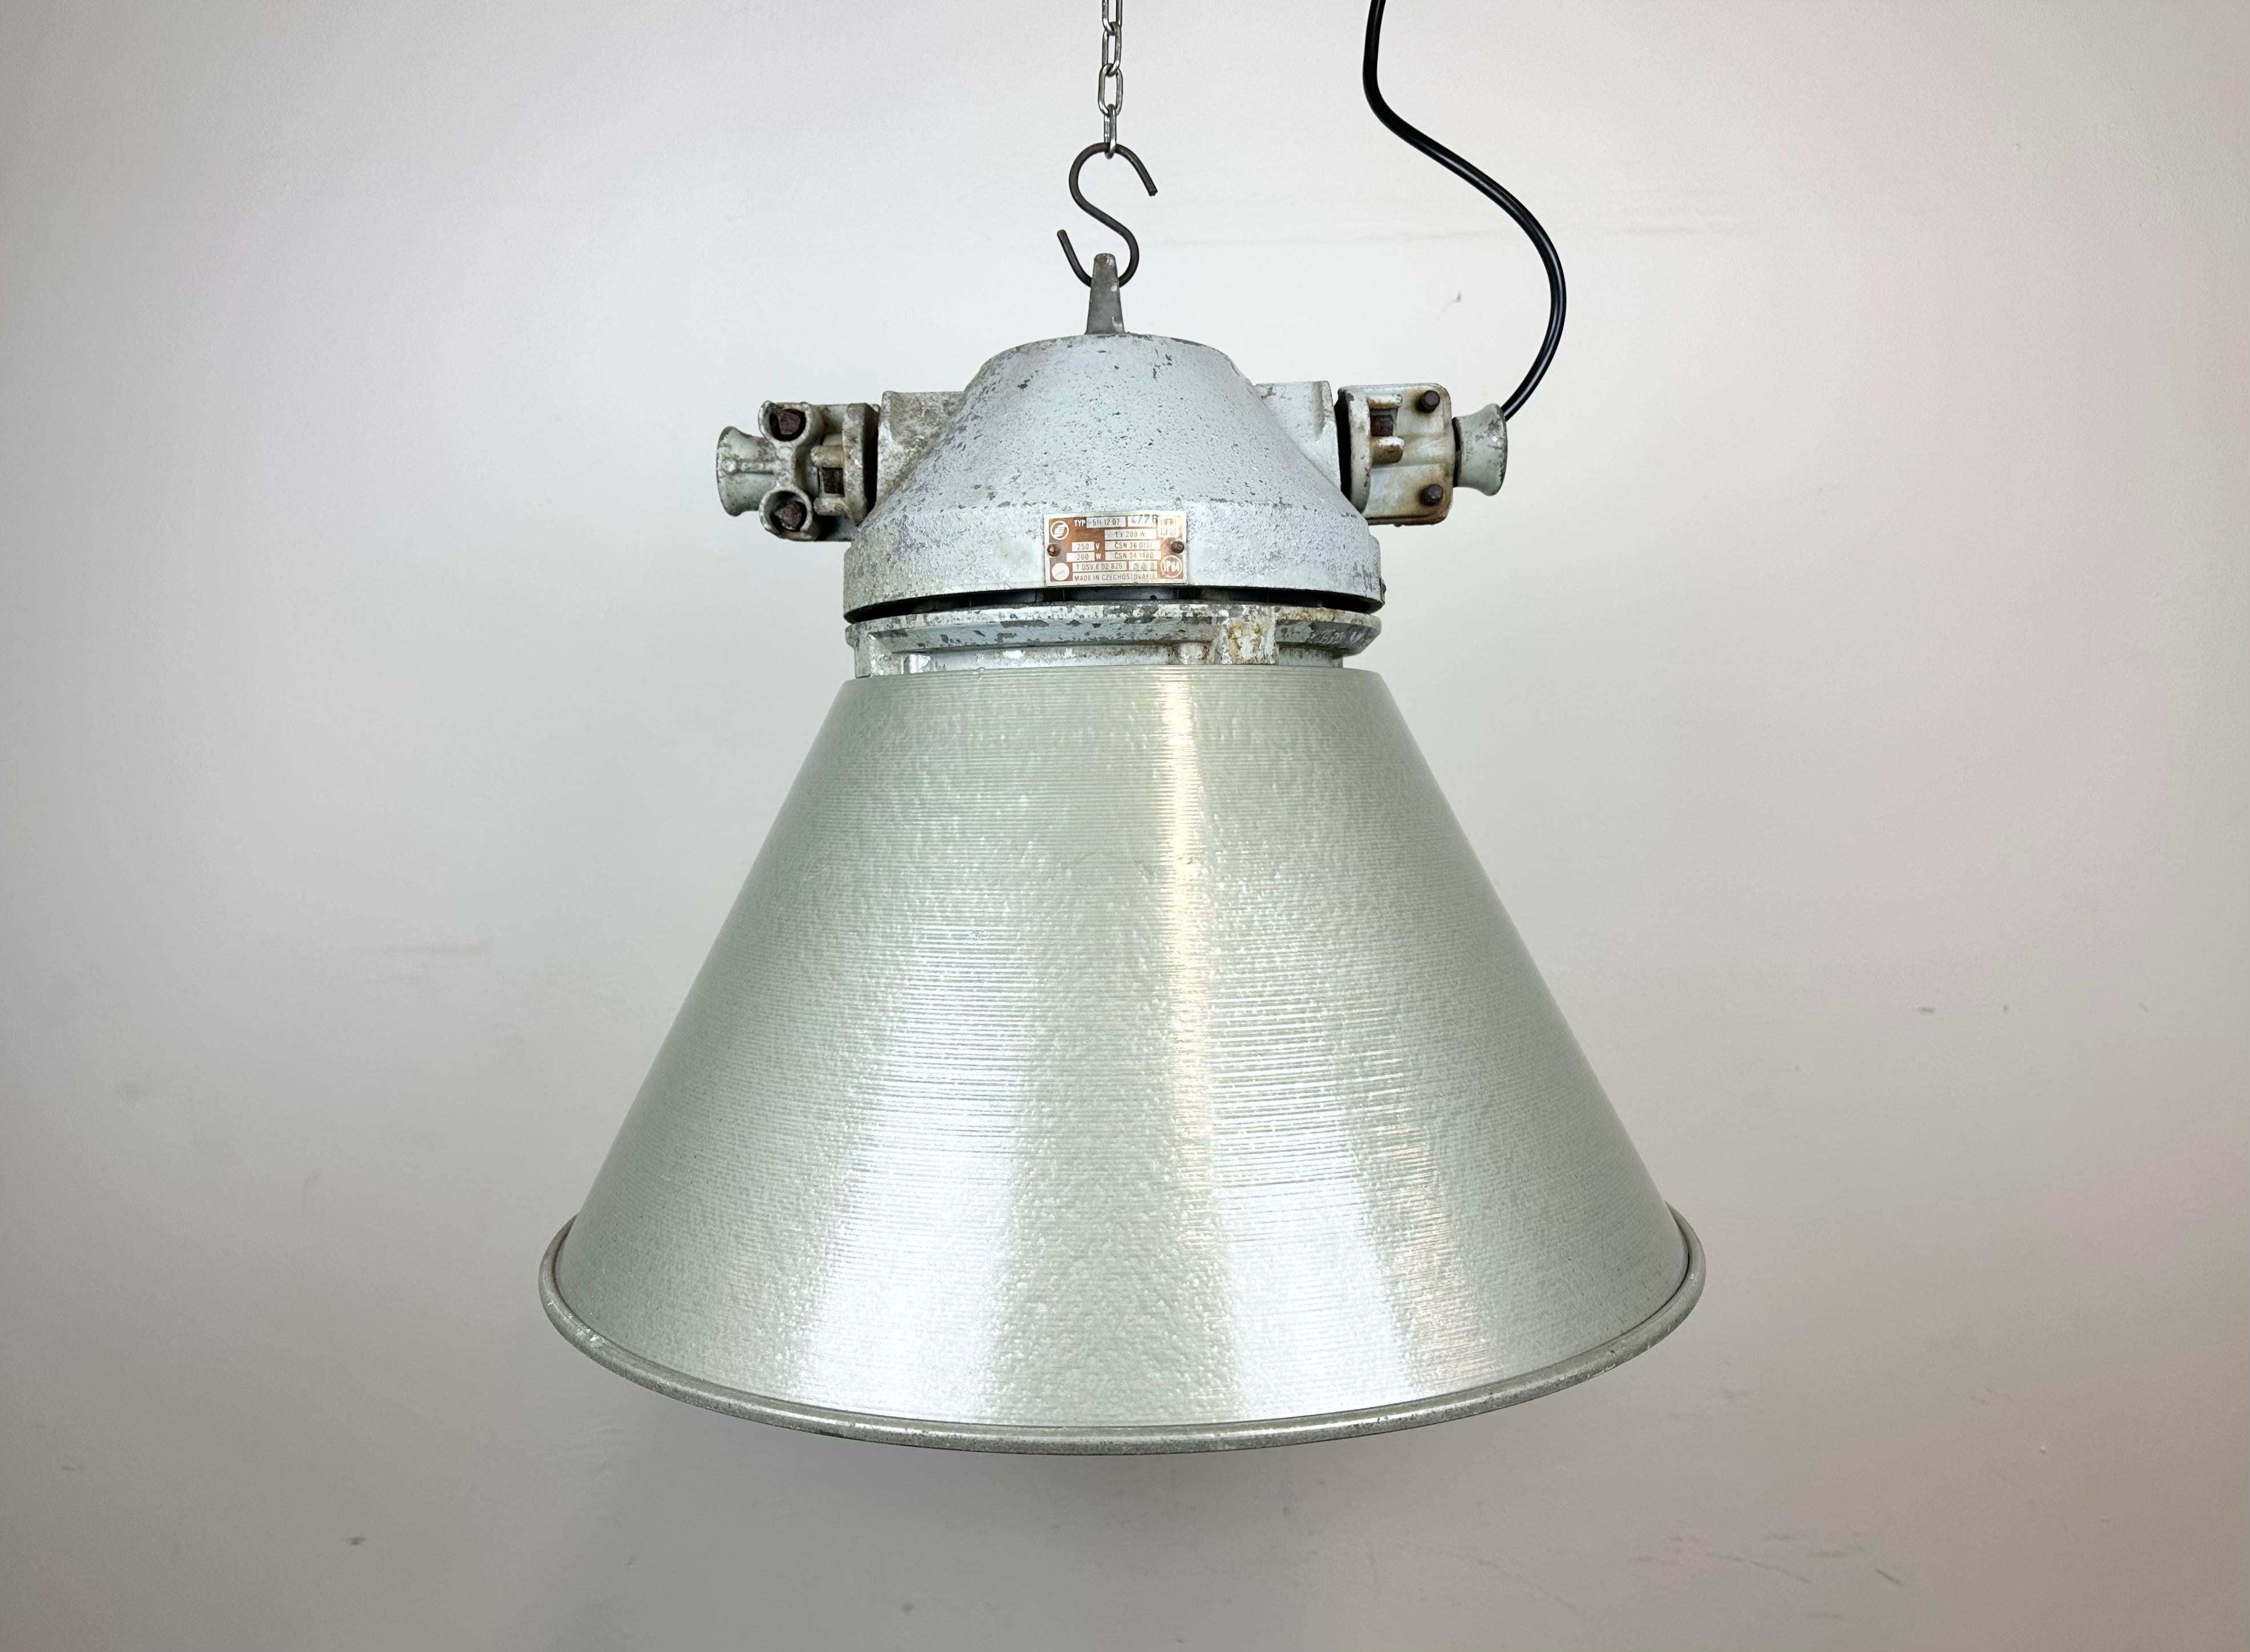 Industrial factory light manufactured by Elektrosvit in former Czechoslovakia during the 1970s. It features a cast aluminium body ,an explosion-proof clear glass and hammerpaint aluminium shade.
The socket requires E27E/26 lightbulbs. New wire. The